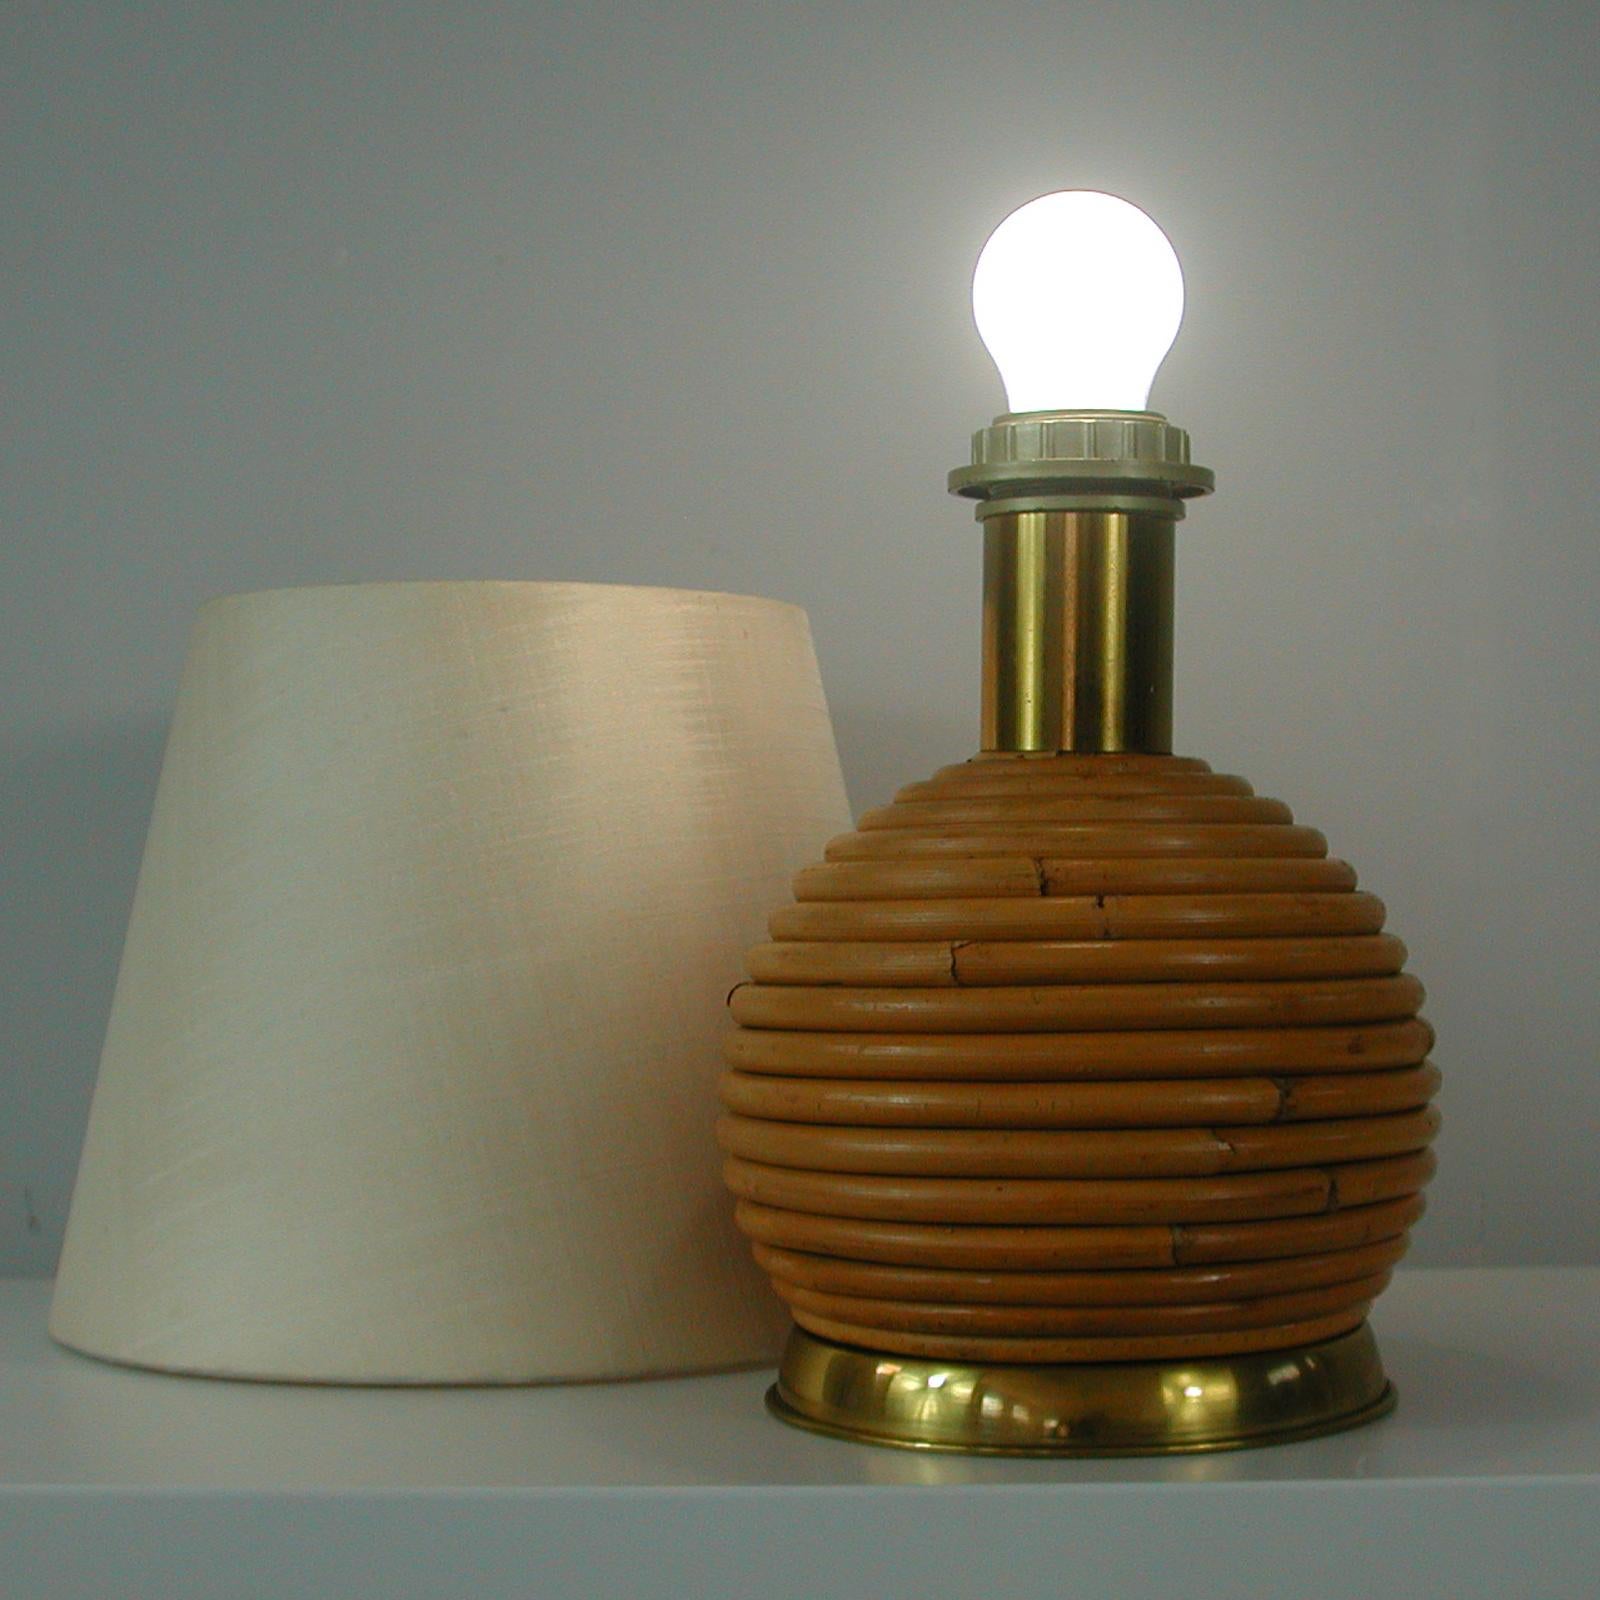 Swedish Midcentury Wicker and Brass Globe Table Lamp, 1960s For Sale 5